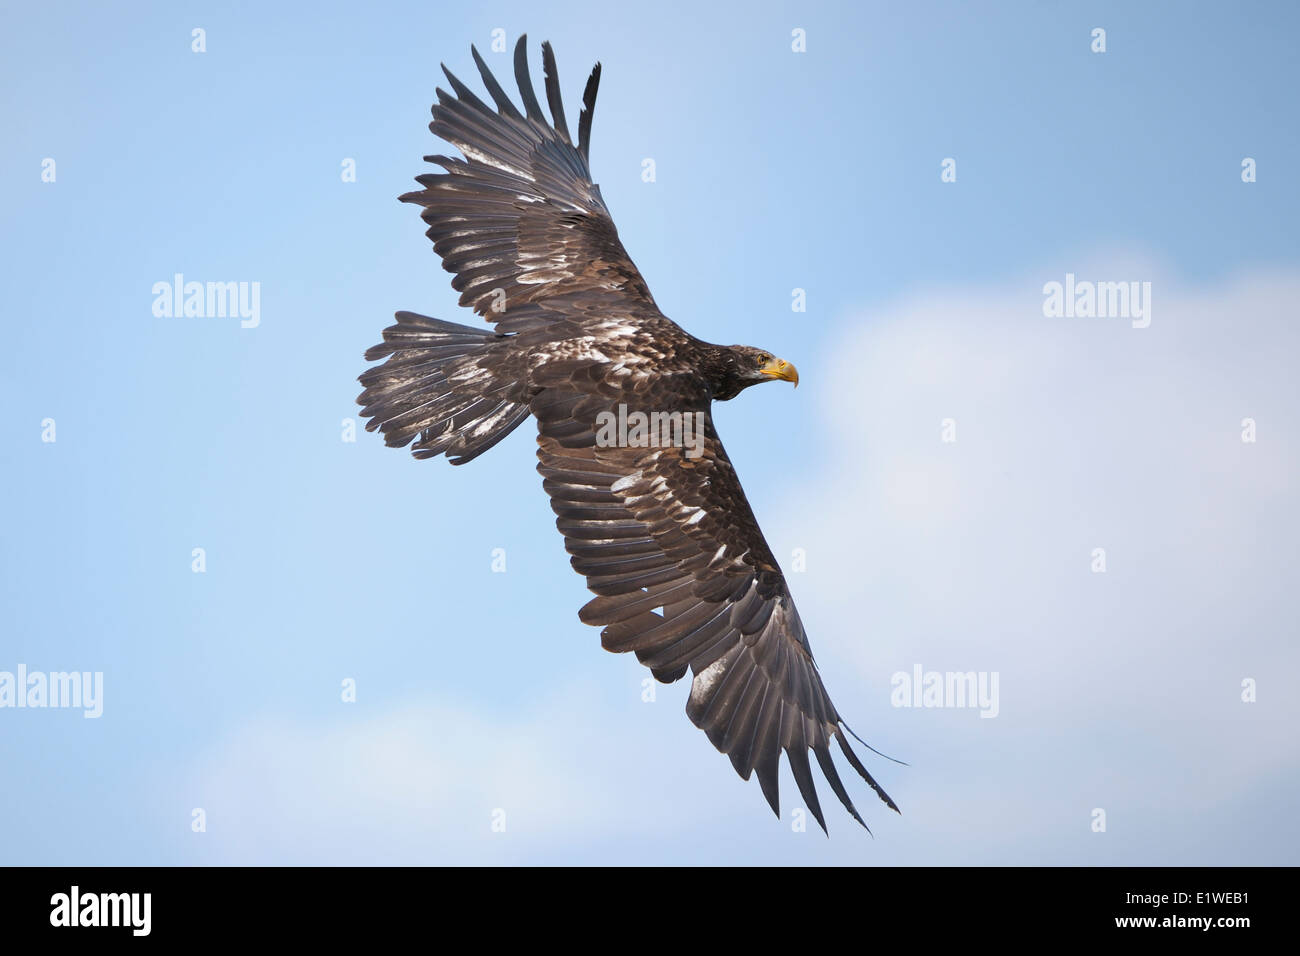 A golden eagle in flight Stock Photo